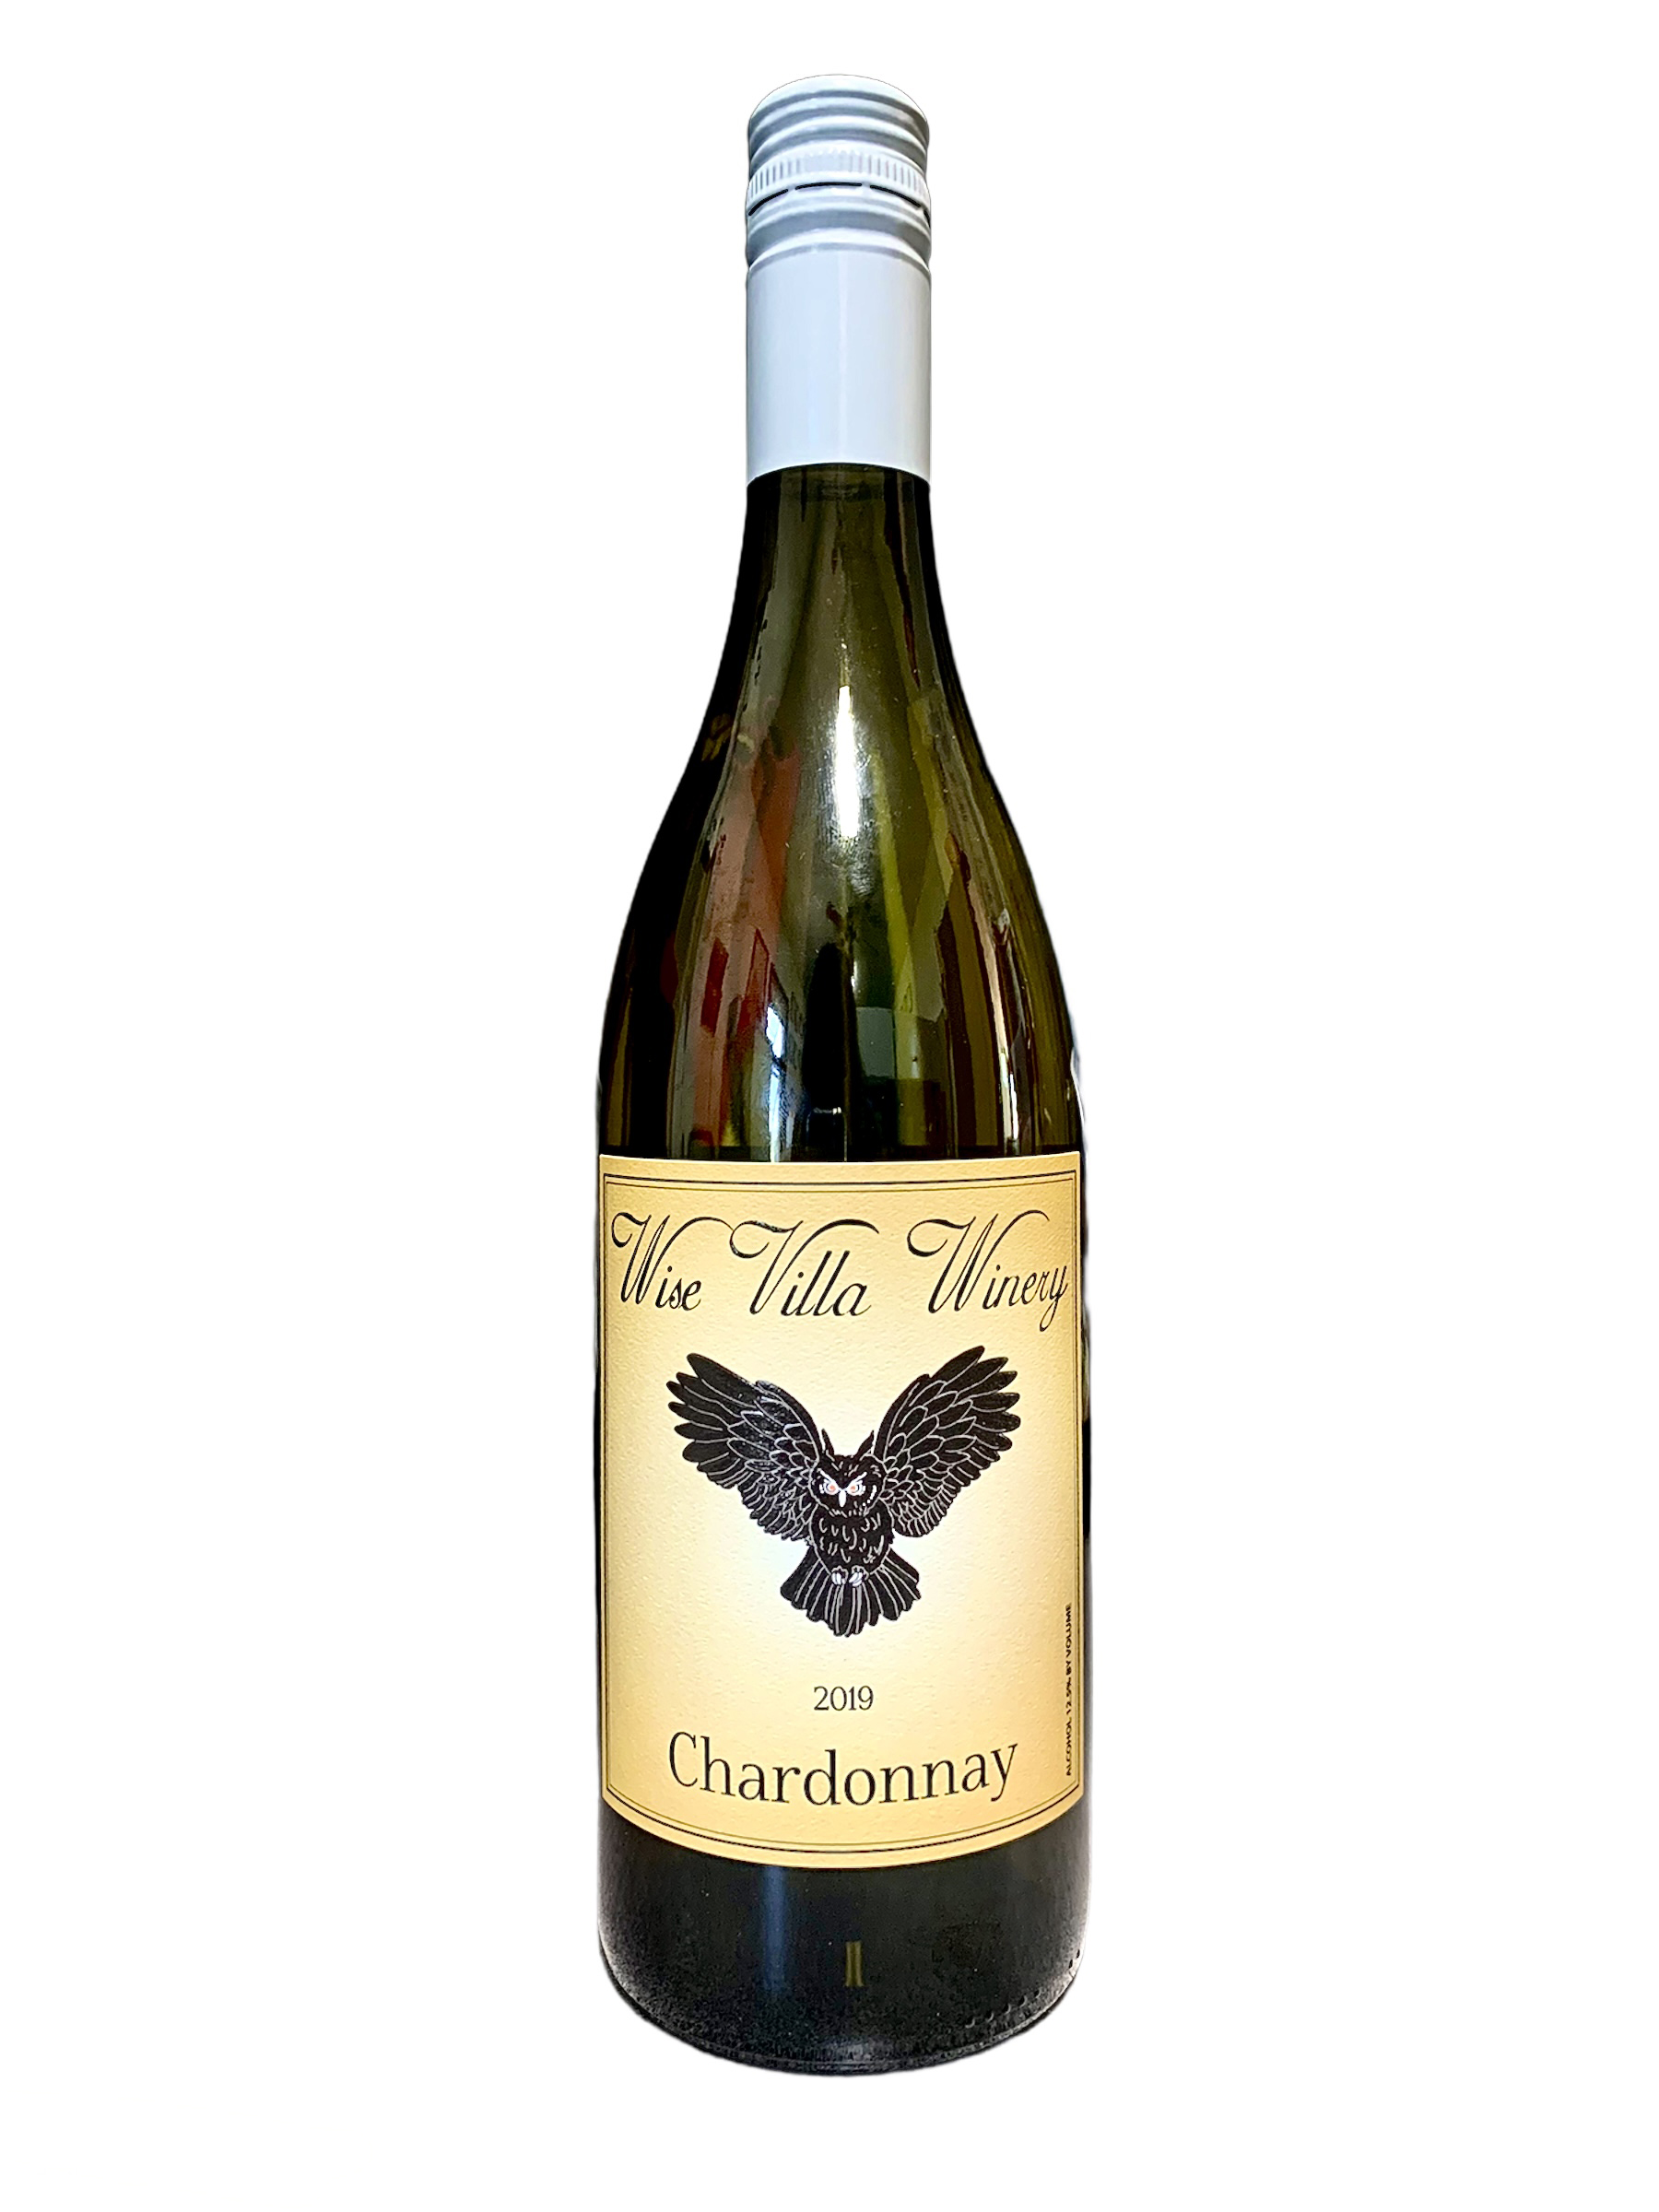 Product Image for 2019 Chardonnay